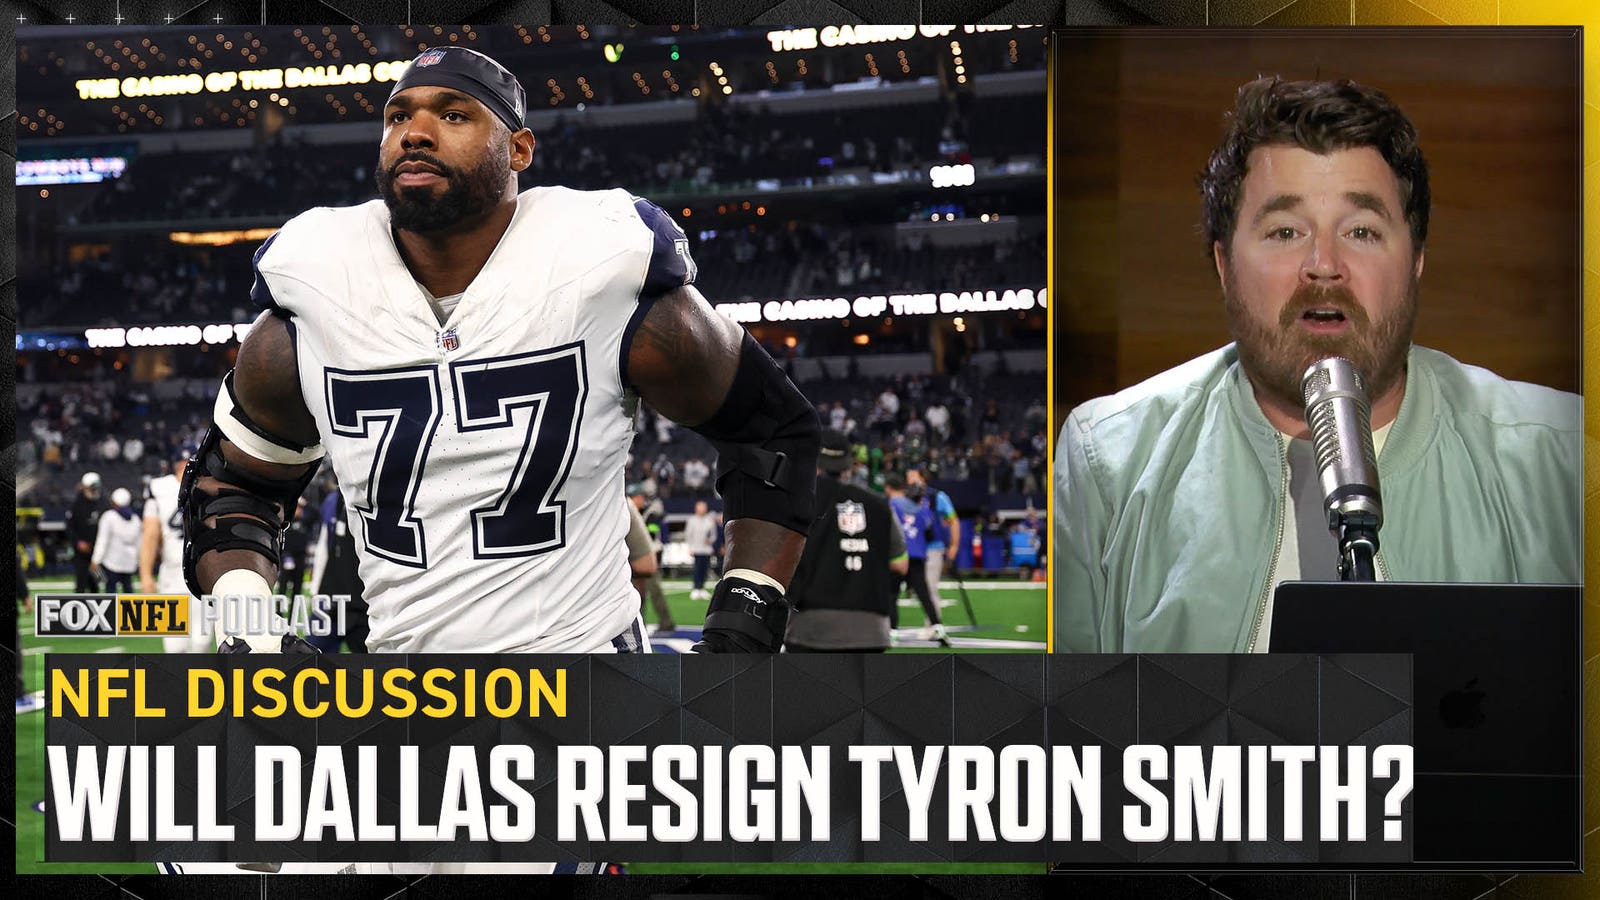 How big a mistake would it be for Dallas not to re-sign Tyron Smith?